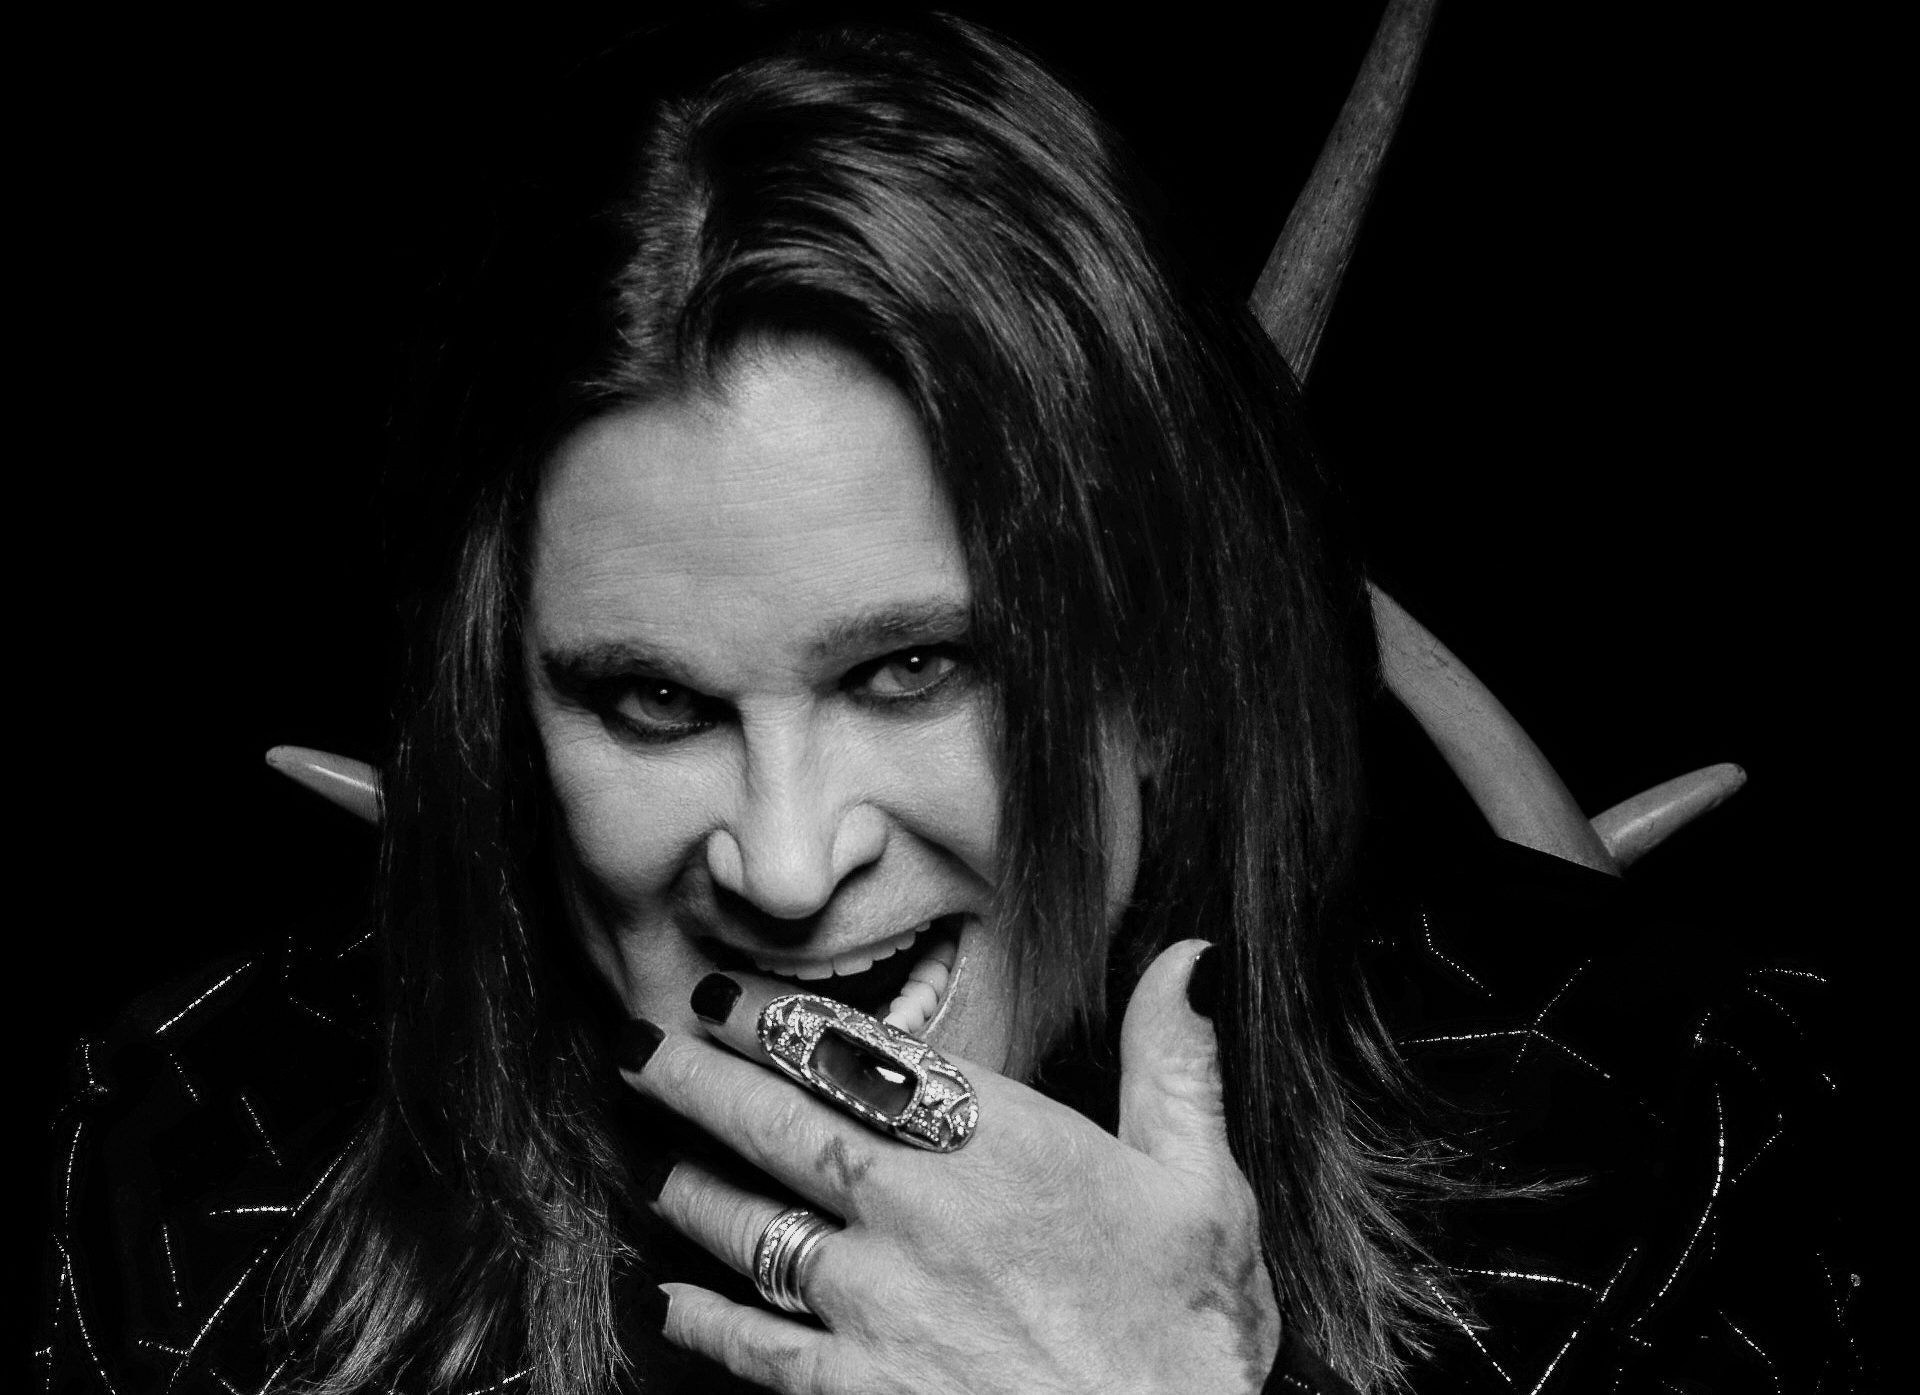 Ozzy Osborne On Extensive Surgery Procedures: “I’m In A Lot Of Discomfort”